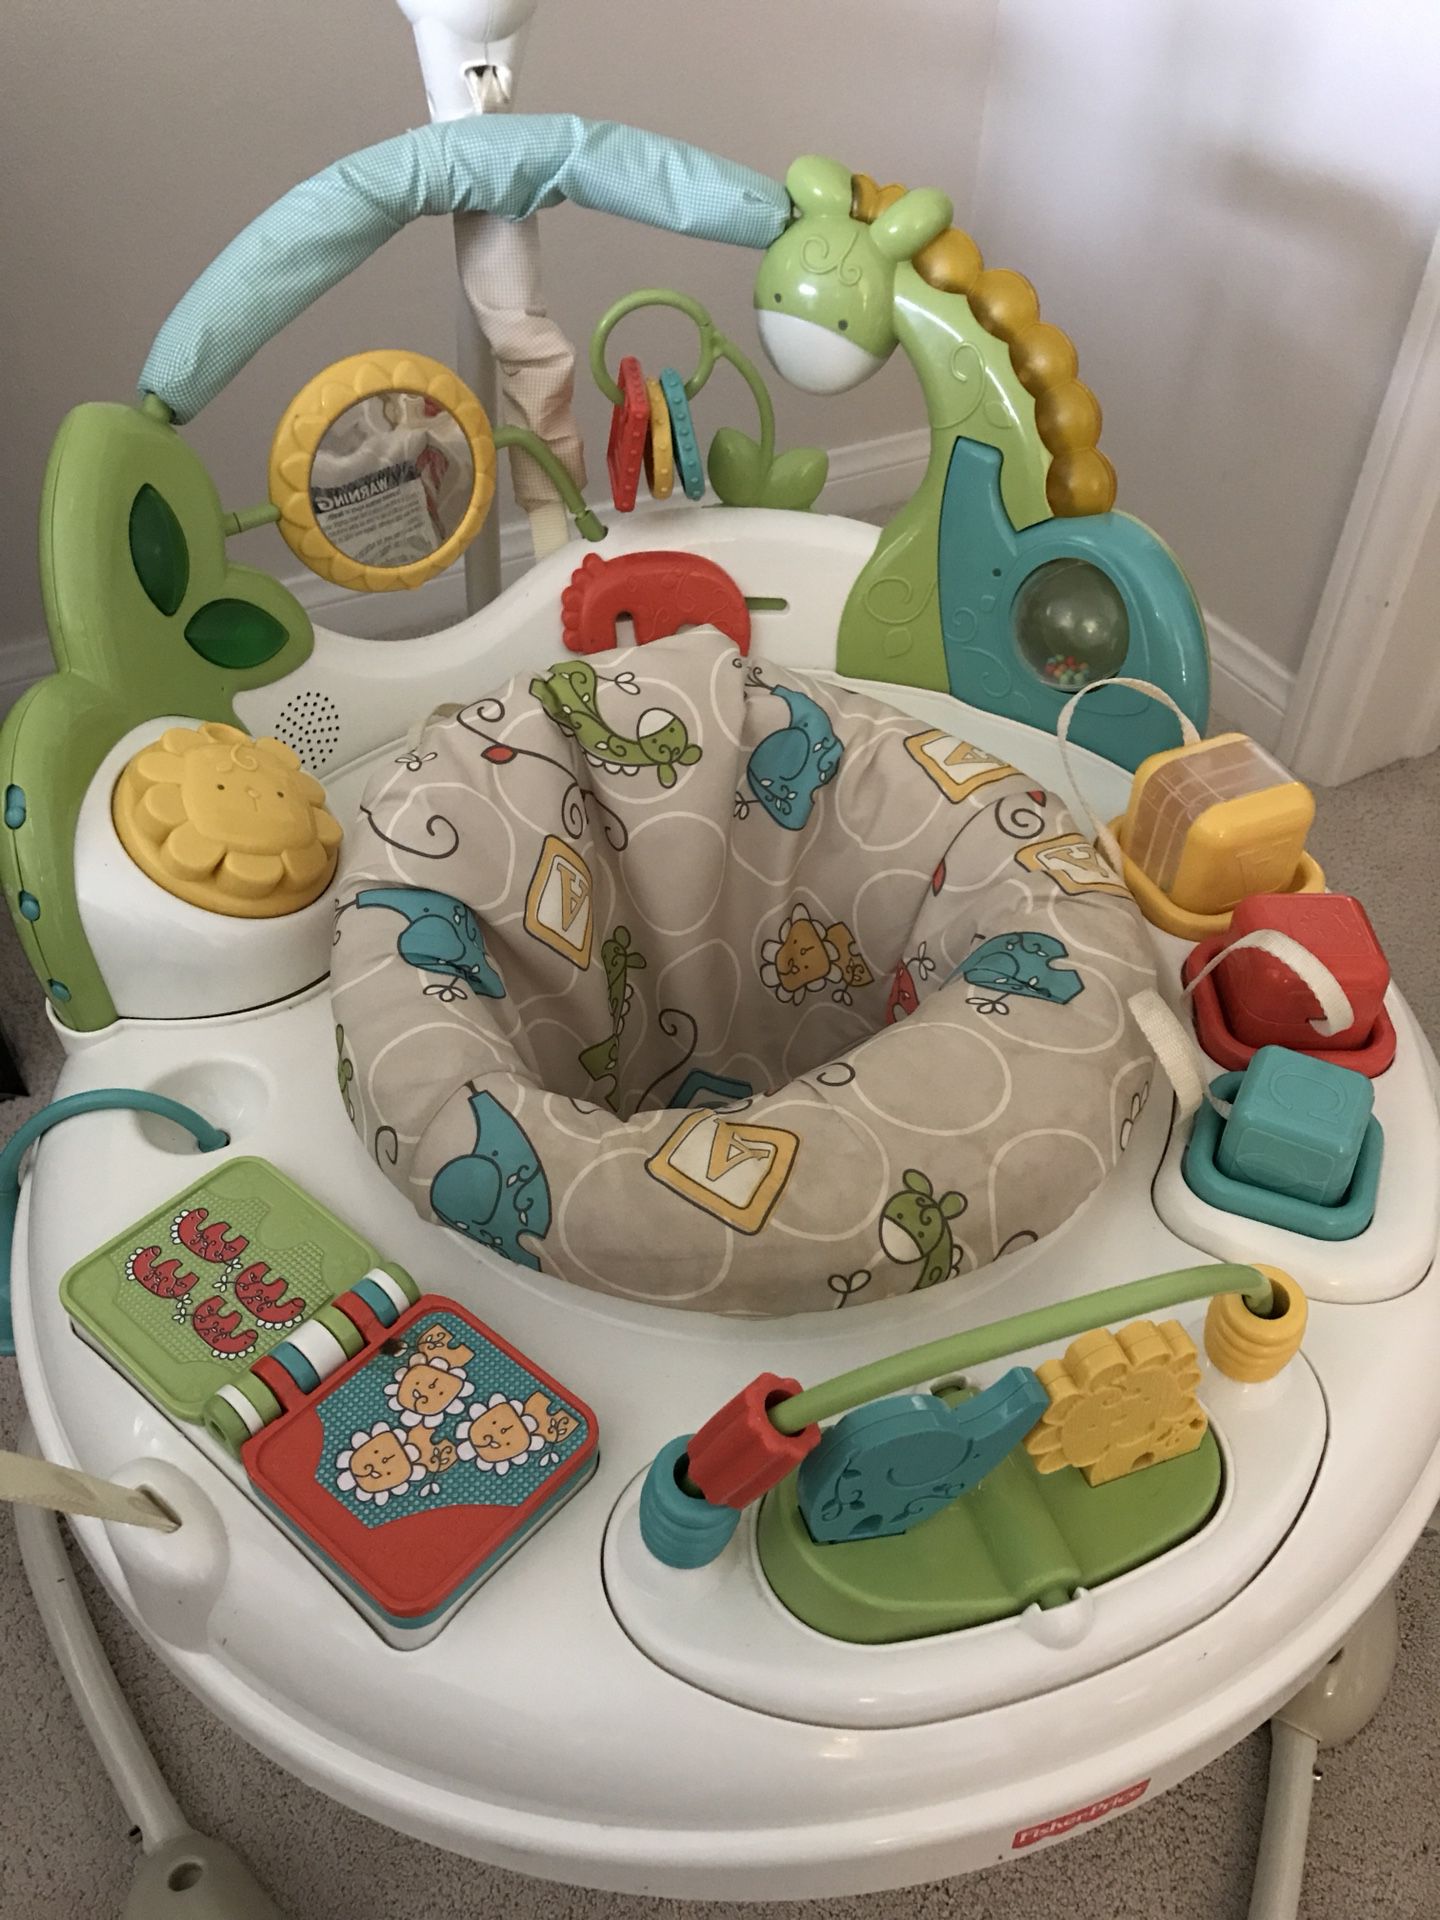 Fisher-Price Baby Bouncer Rainforest Jumperoo Activity Center with Music  Lights Sounds and Developmental Toys for Sale in Valley Stream, NY - OfferUp